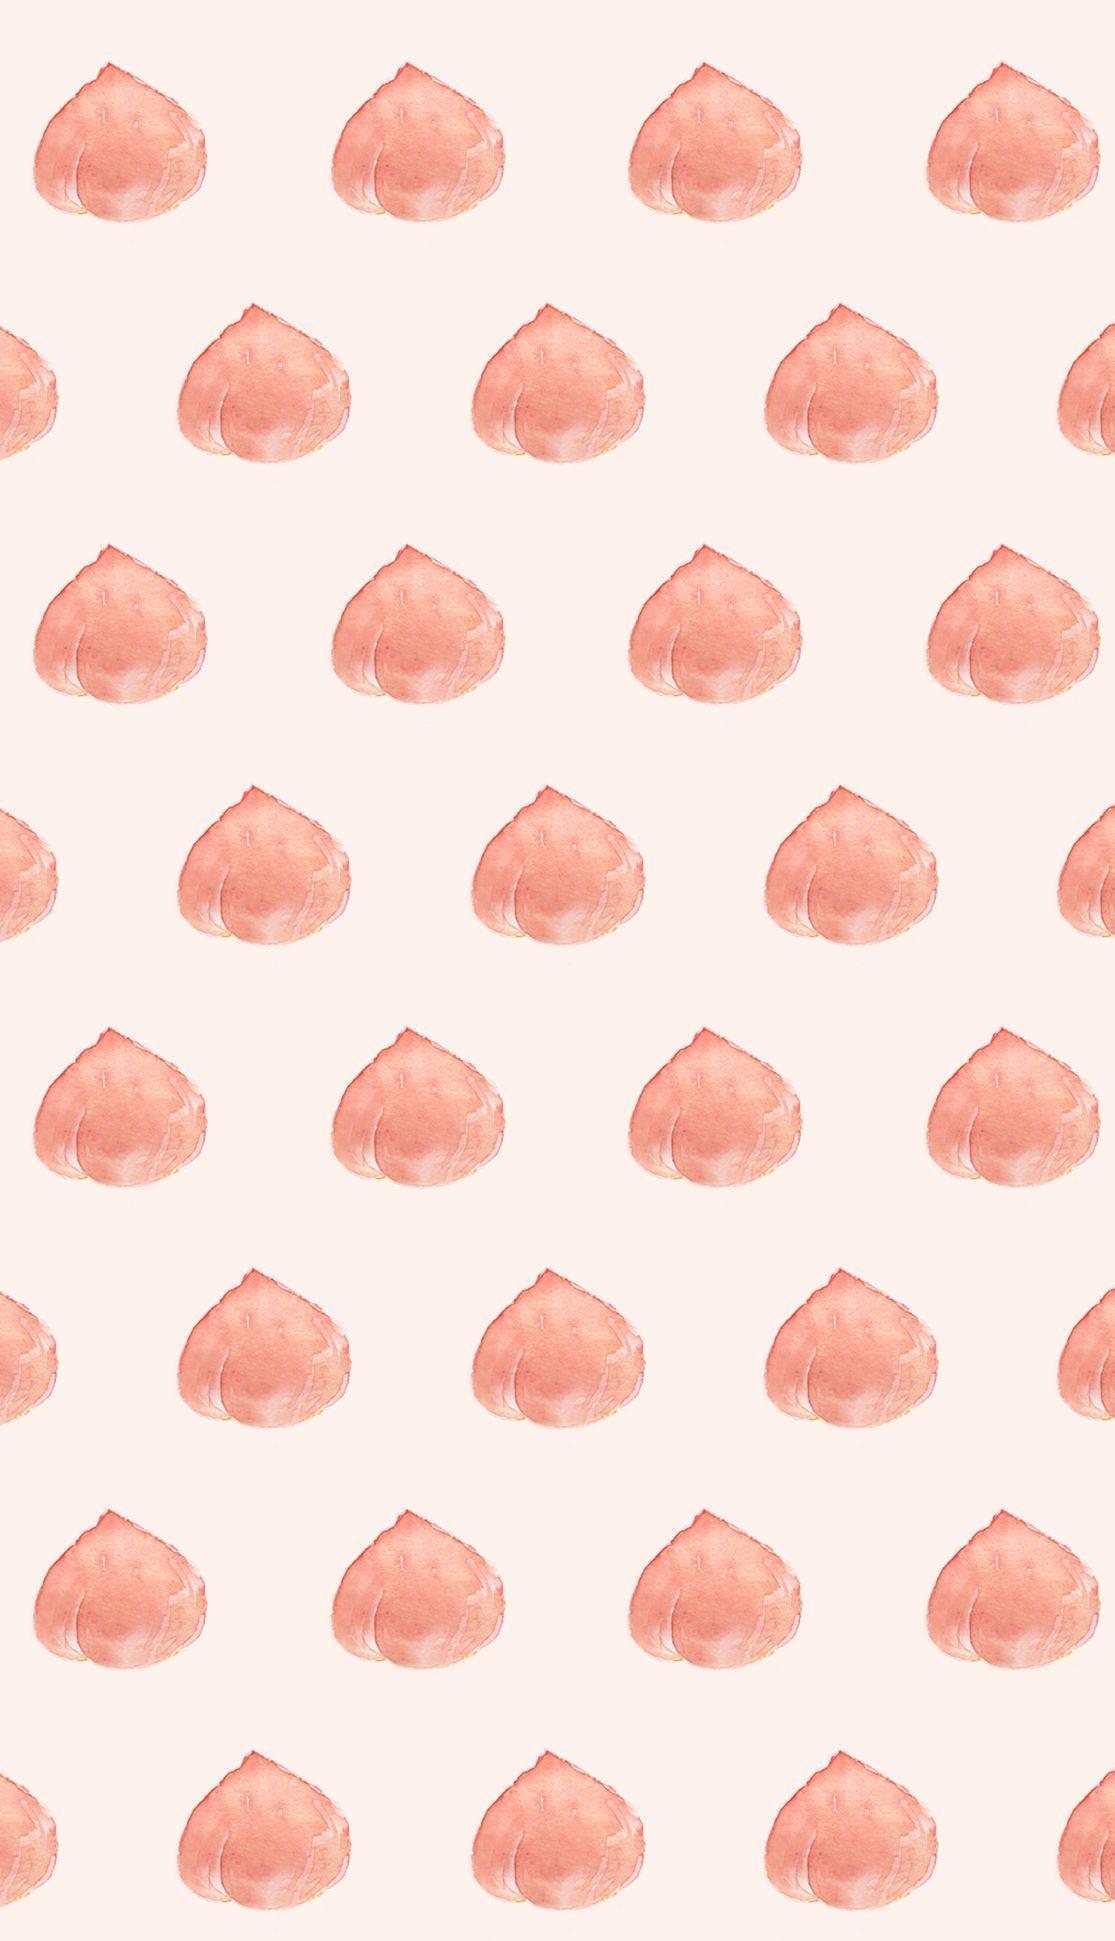 Peach Aesthetic Wallpaper Free Peach Aesthetic Background